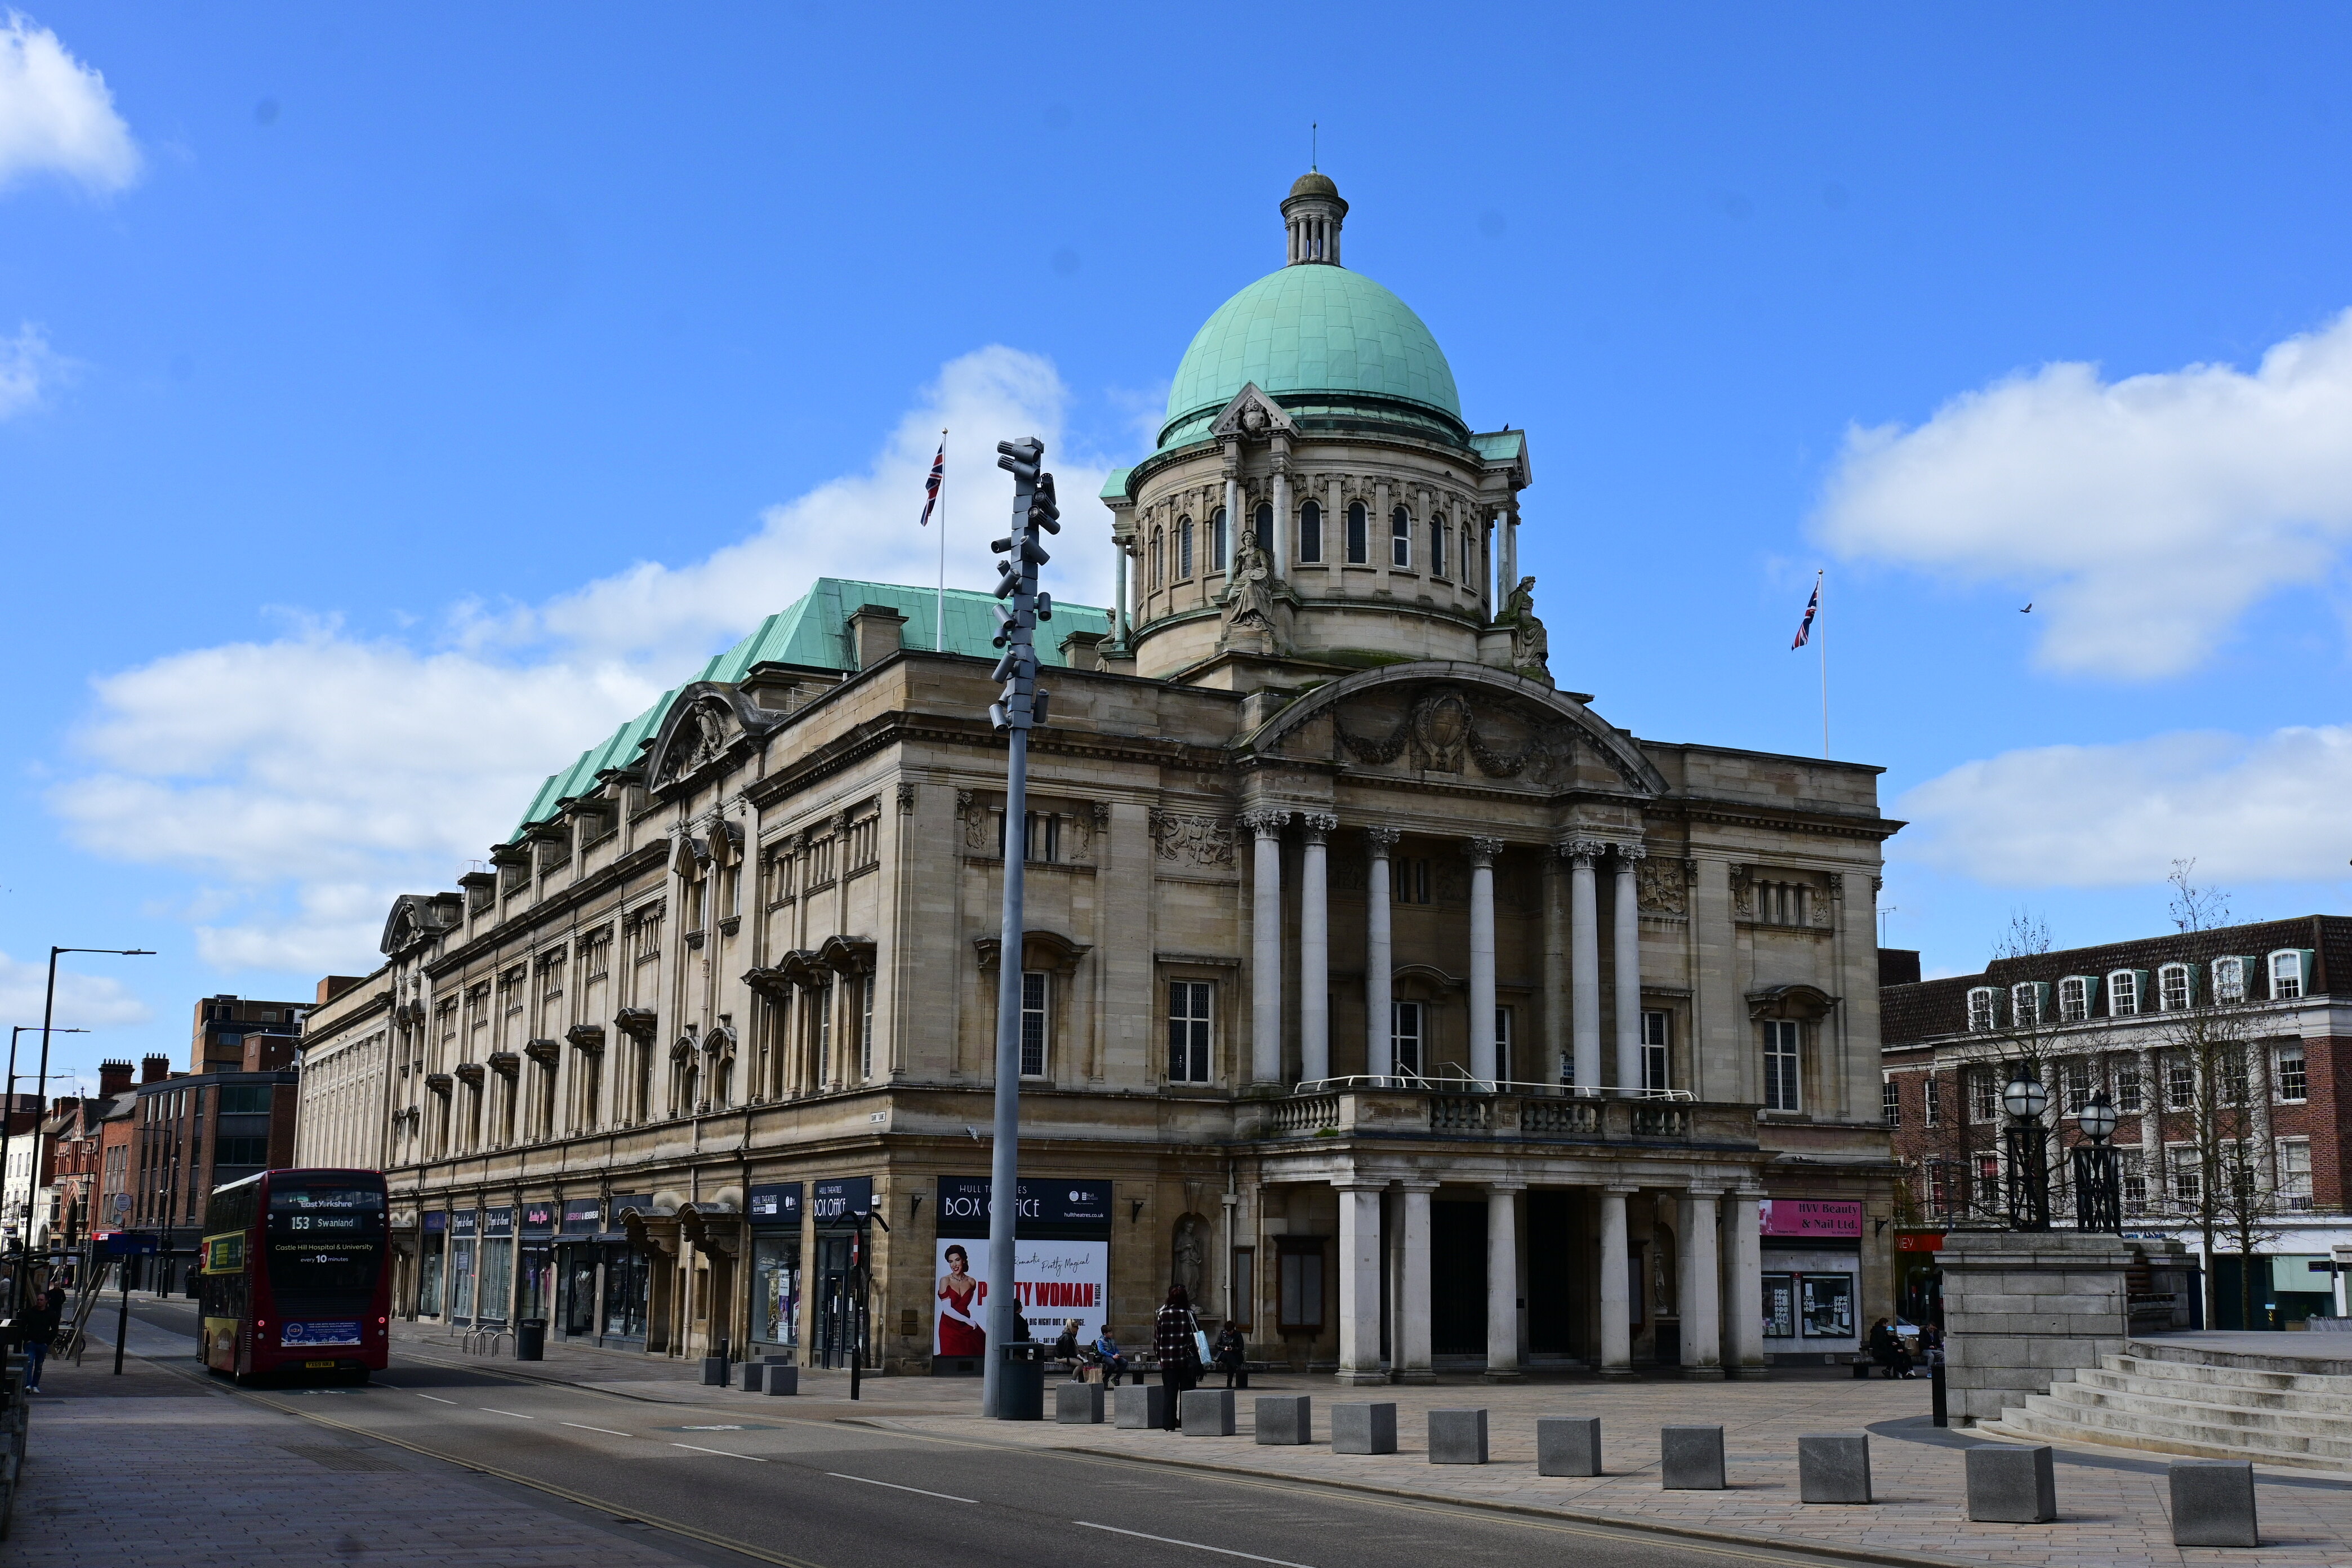 31-facts-about-kingston-upon-hull